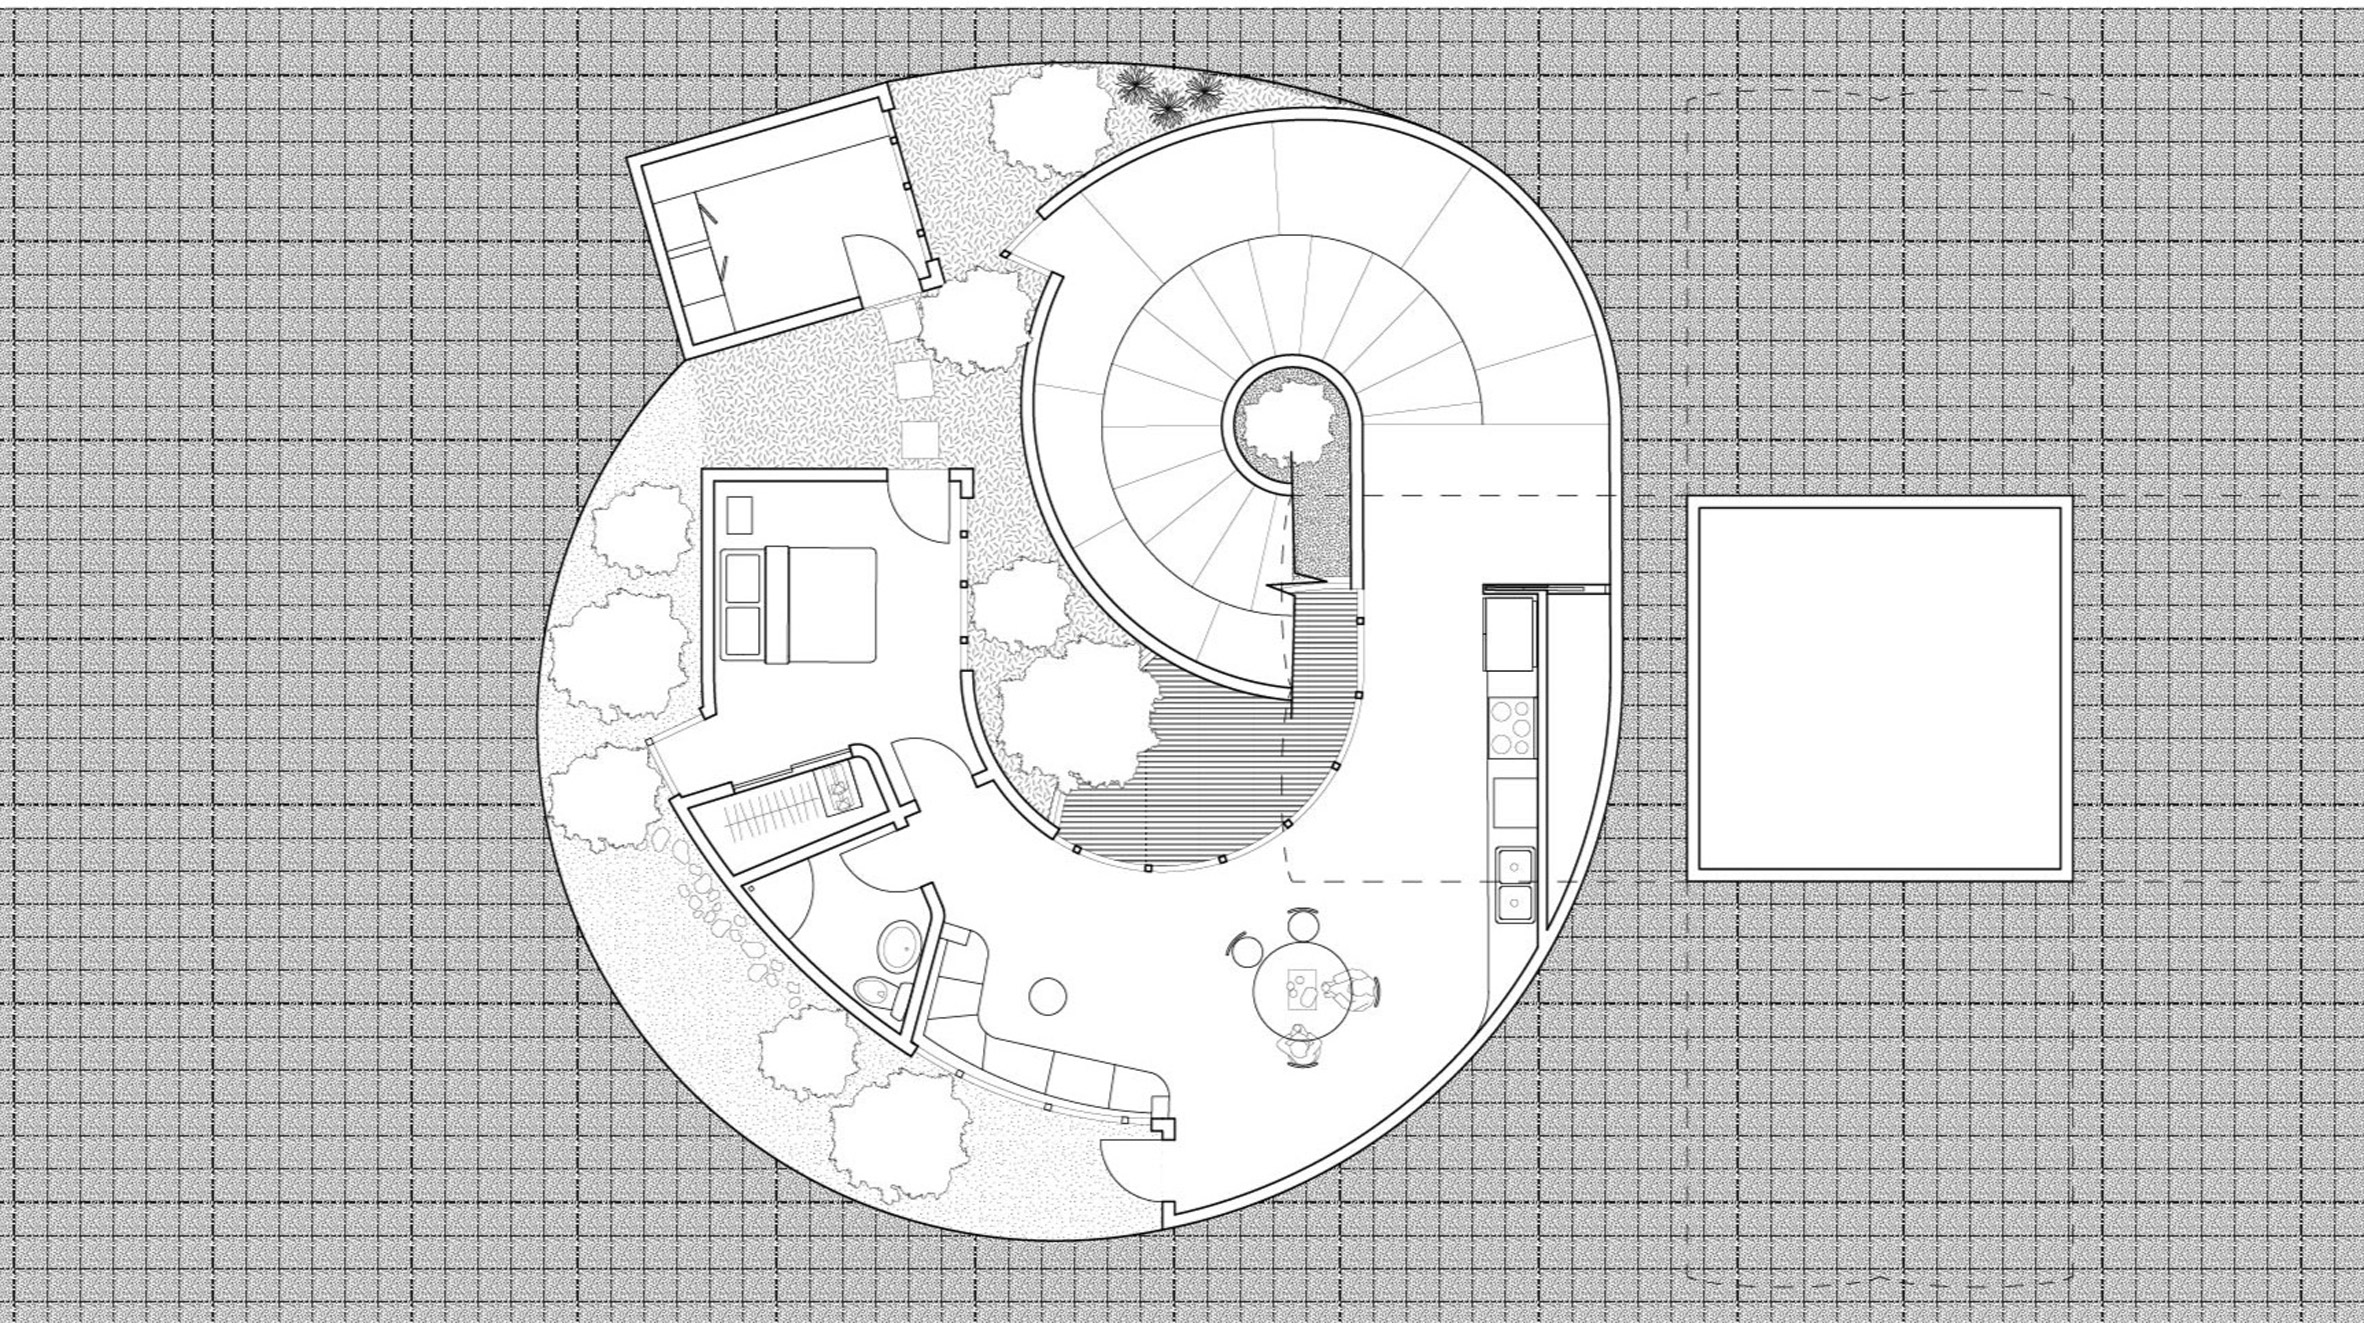 Architectural drawing plan view showing spiral-shaped house